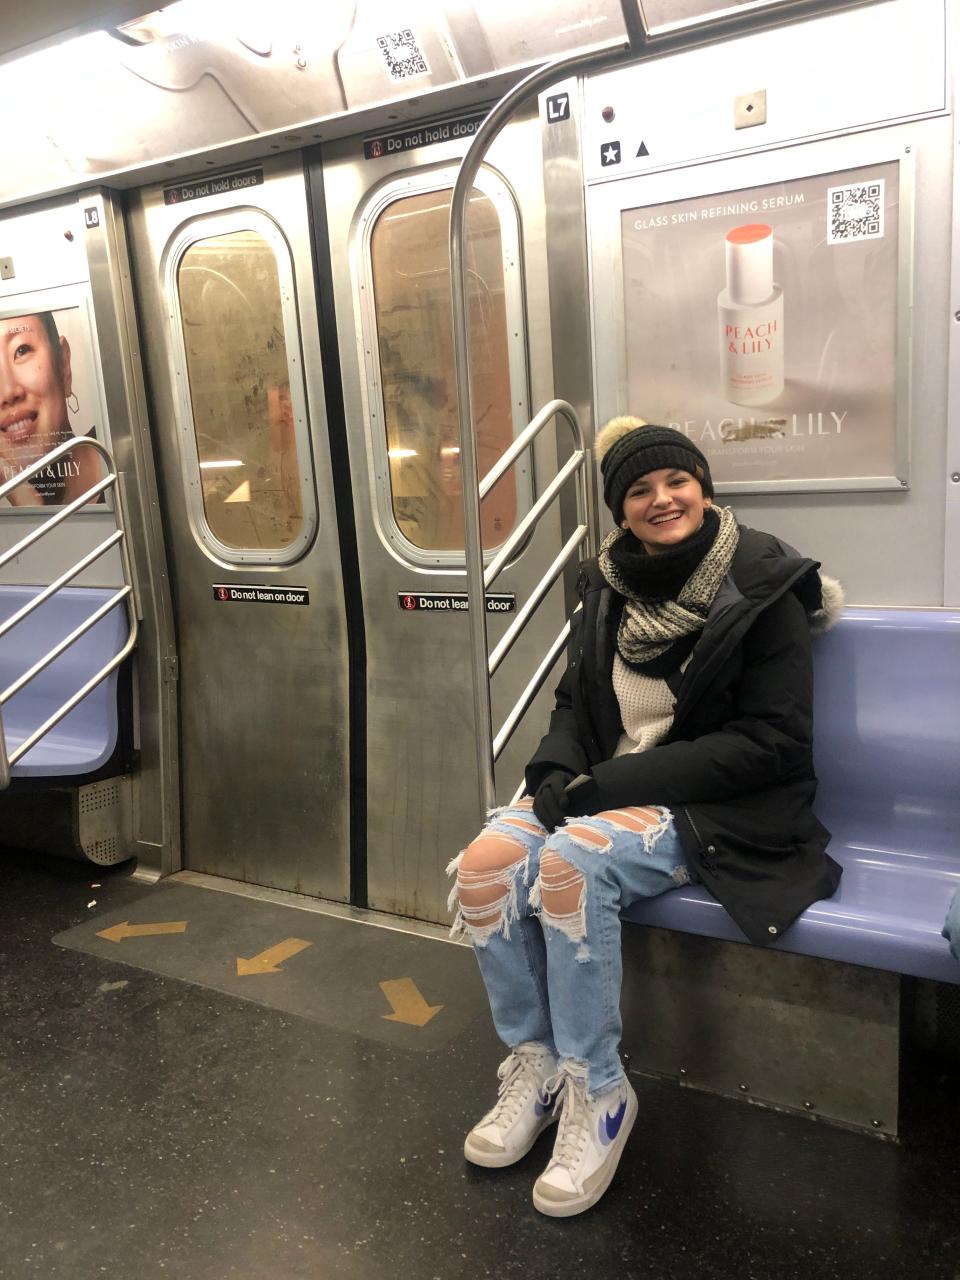 Letting kids learn to navigate like this 14-year-old did on the subways in New York City, can teach children decision-making skills and even improve confidence, experts say.